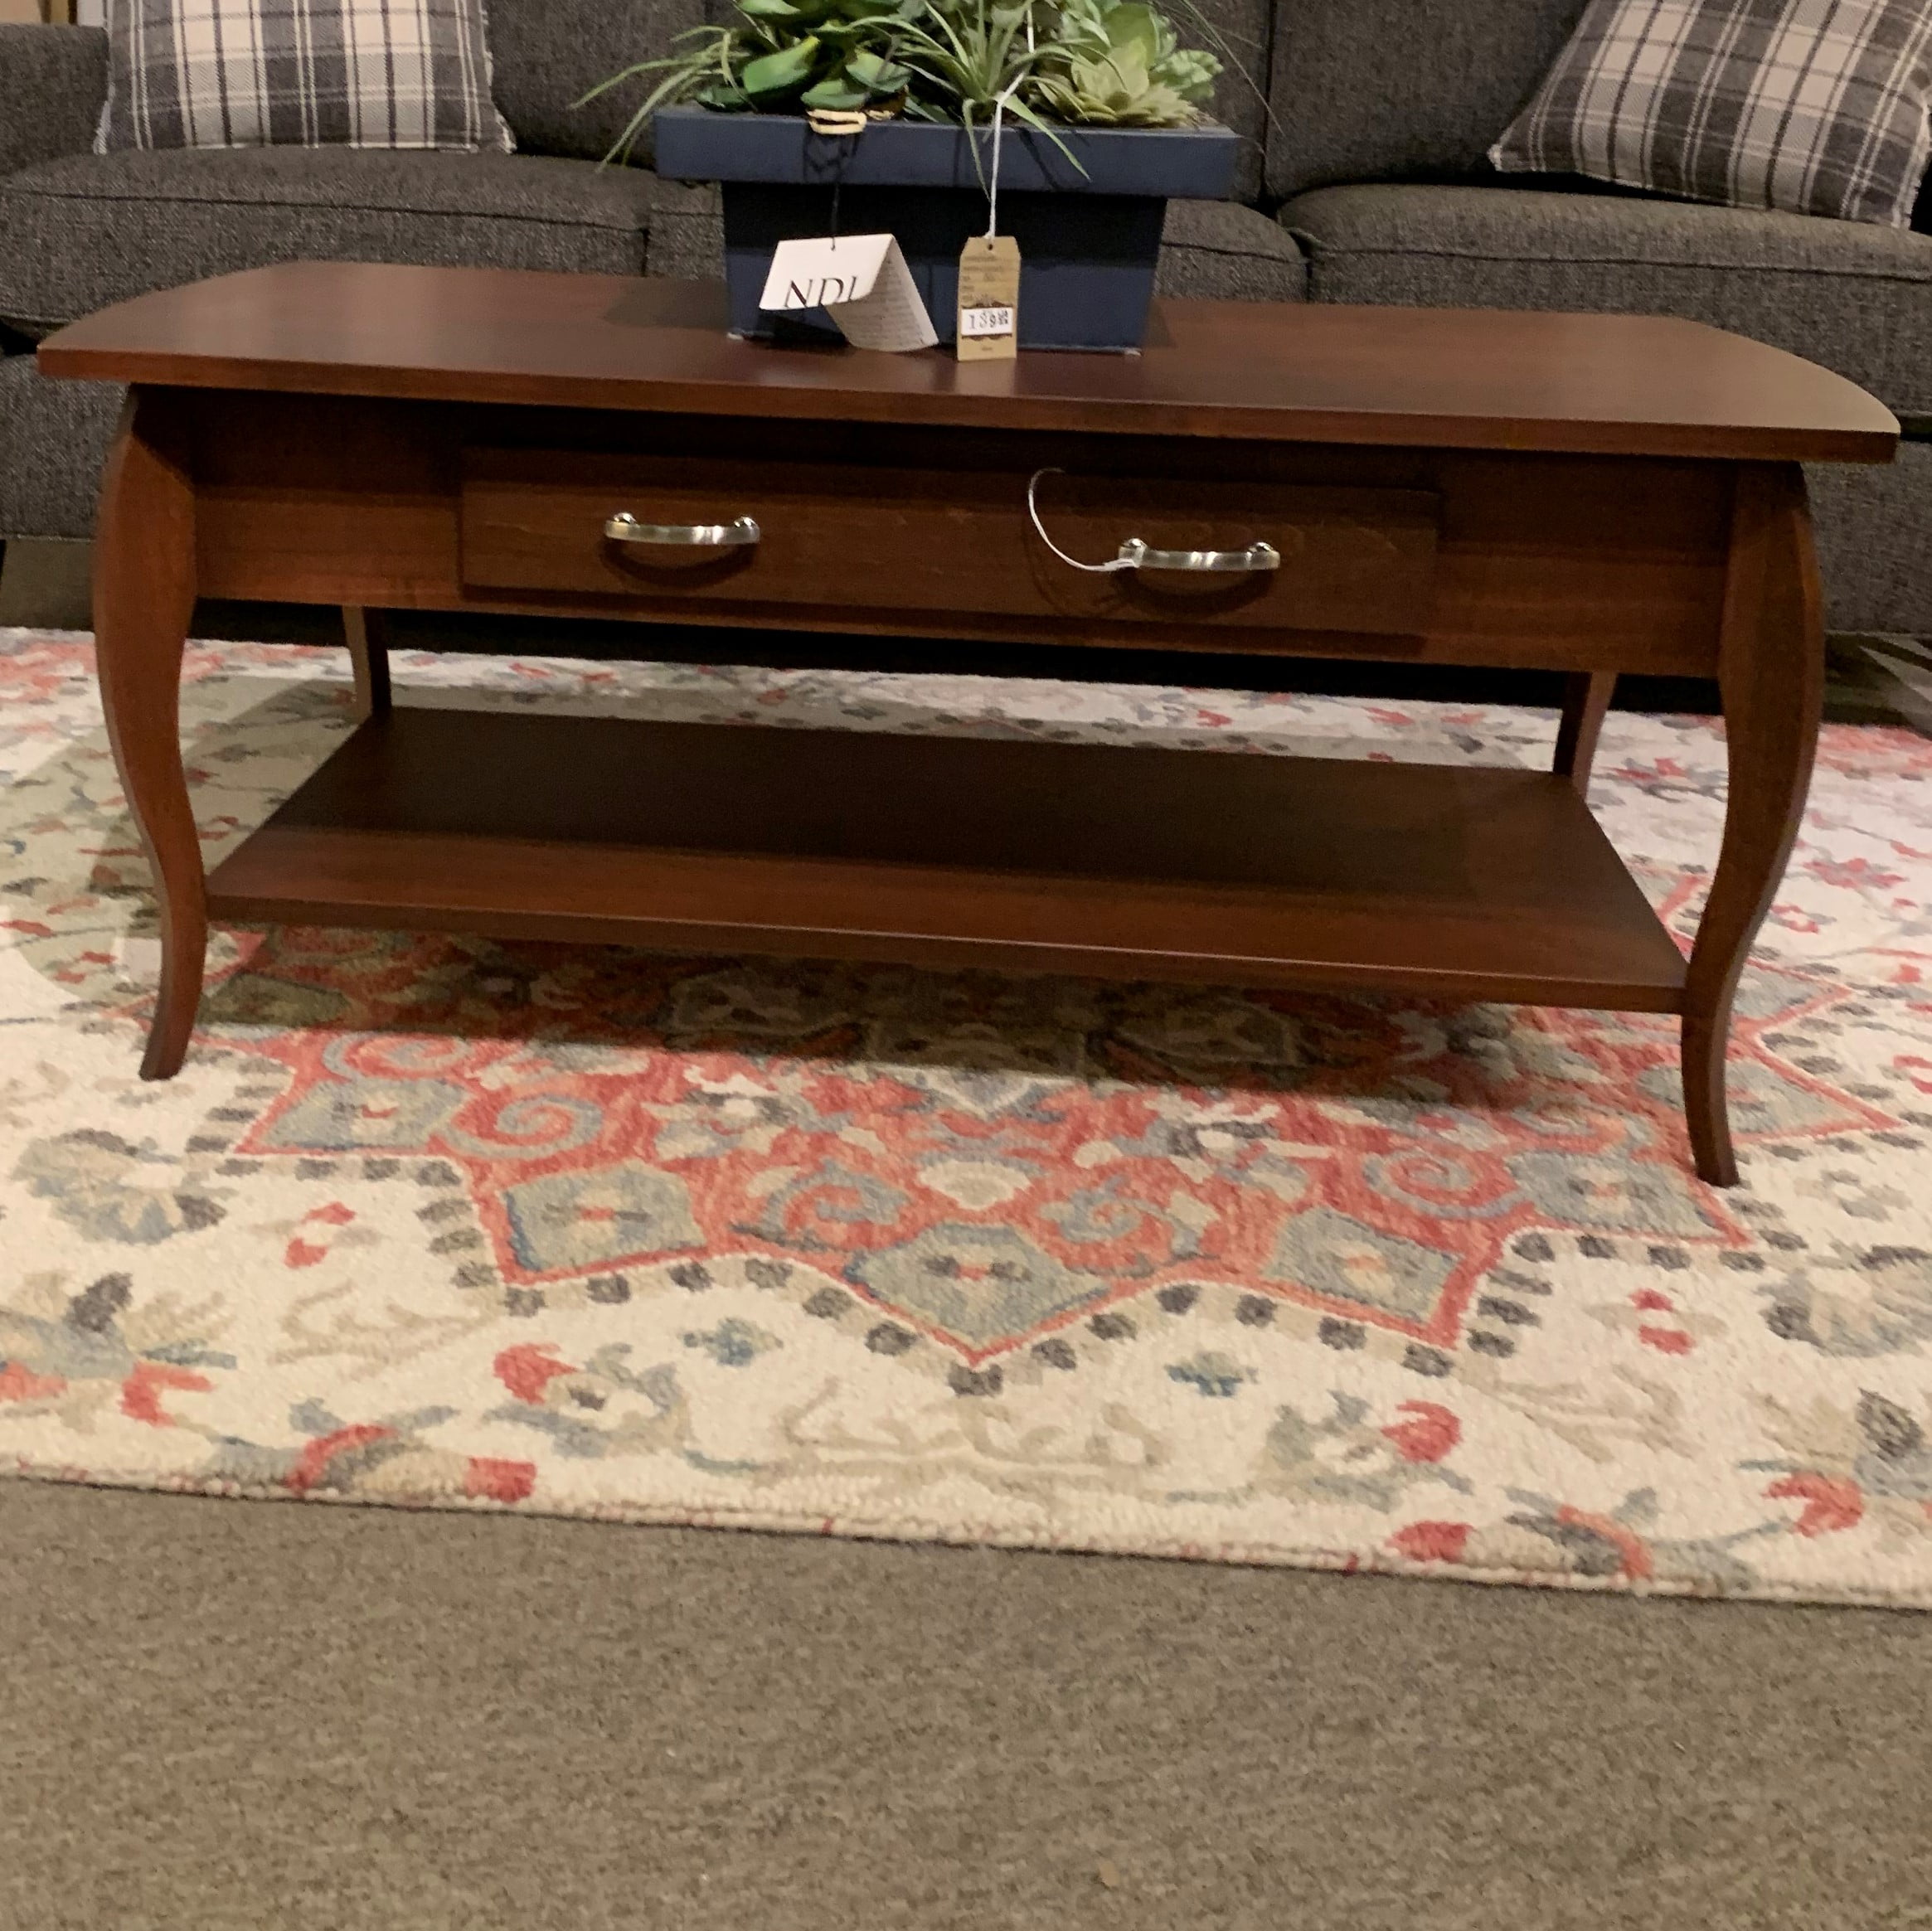 Wooden coffee table with side drawer and metal handles